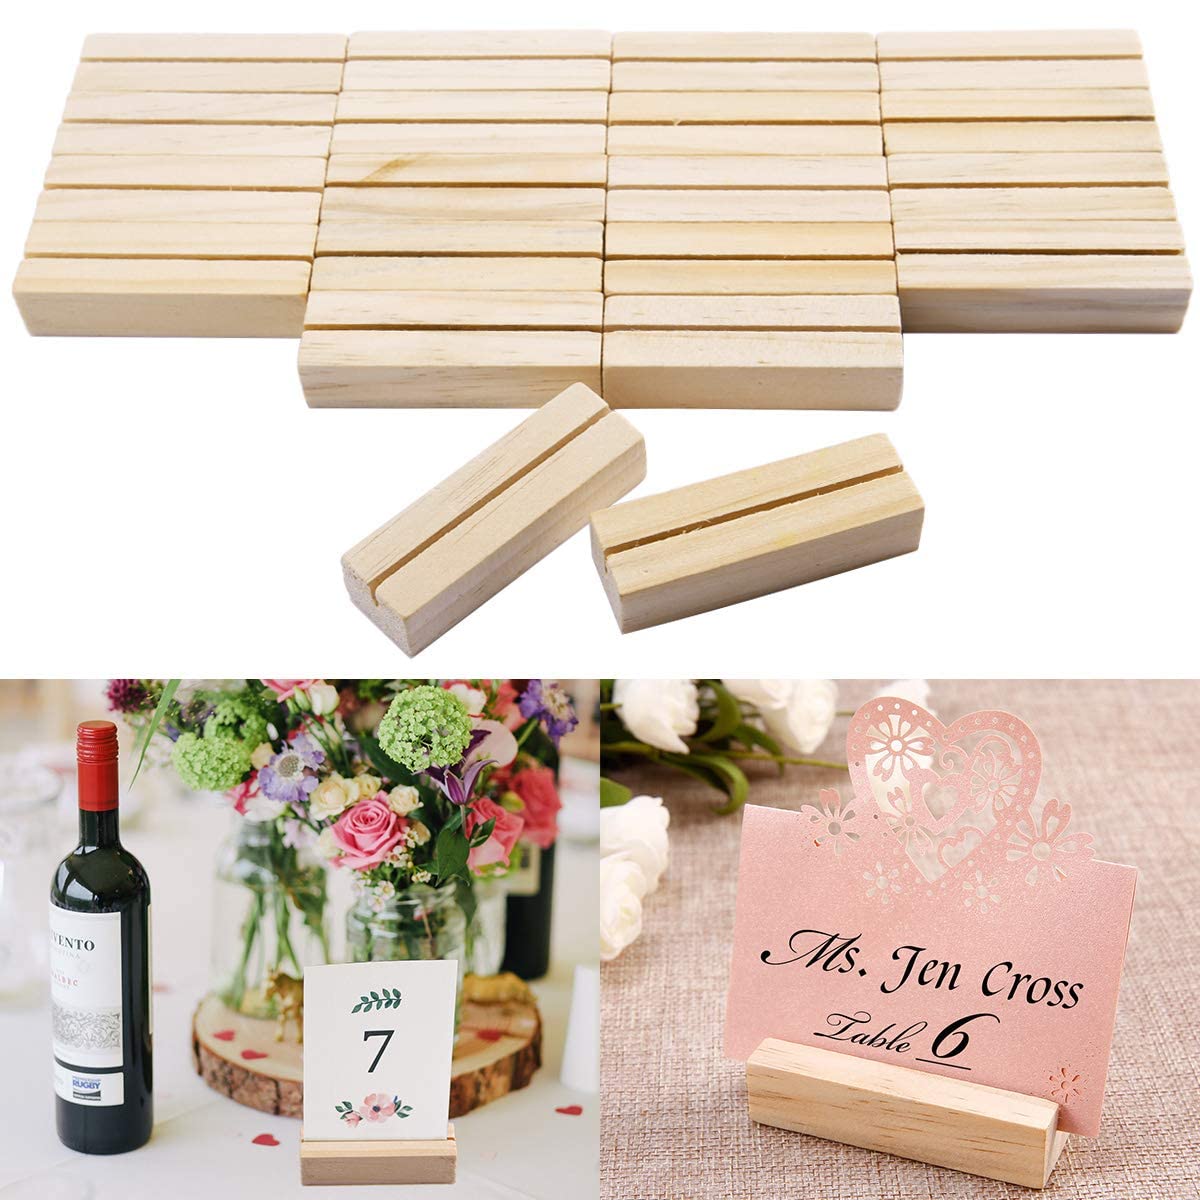 NJ Wood Card Holder Natural Beech Wood Table Number Holders, Wood Photo/picture Holders, Conference name card stand, buffet menu card holder, perfect for Hotel/home parties and conferences: 12 Pcs Set